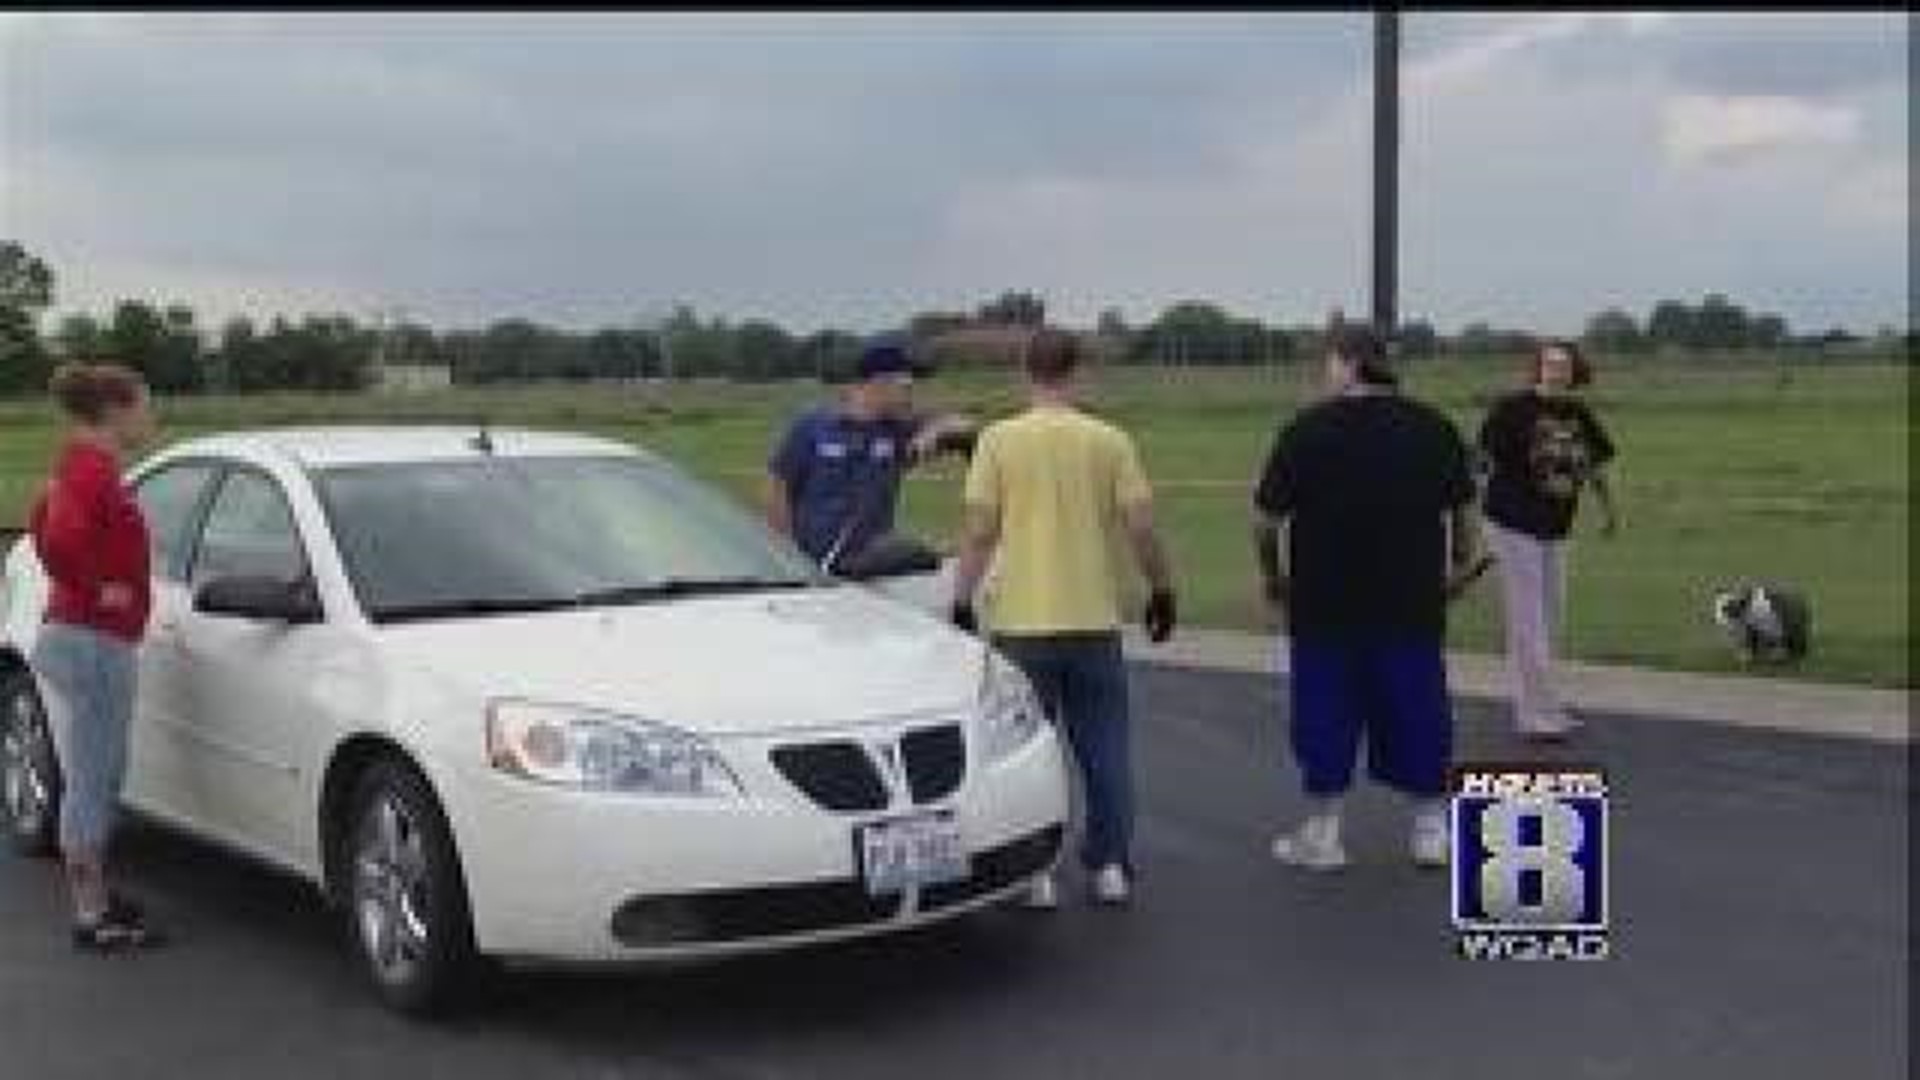 Alleged road rage ends in attack